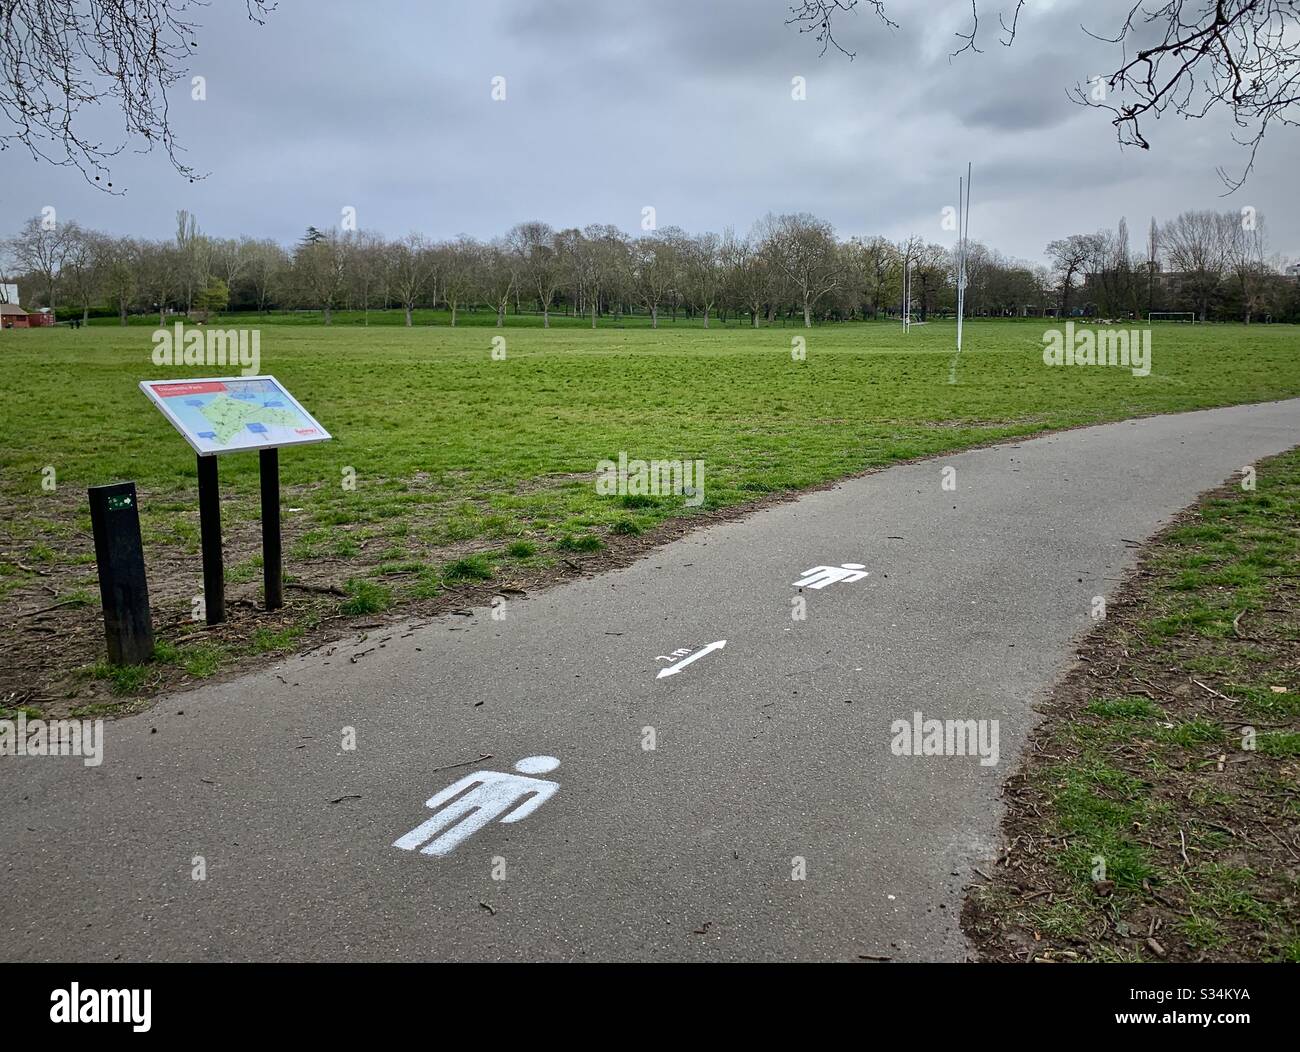 Social distancing stencils in a London Park Stock Photo